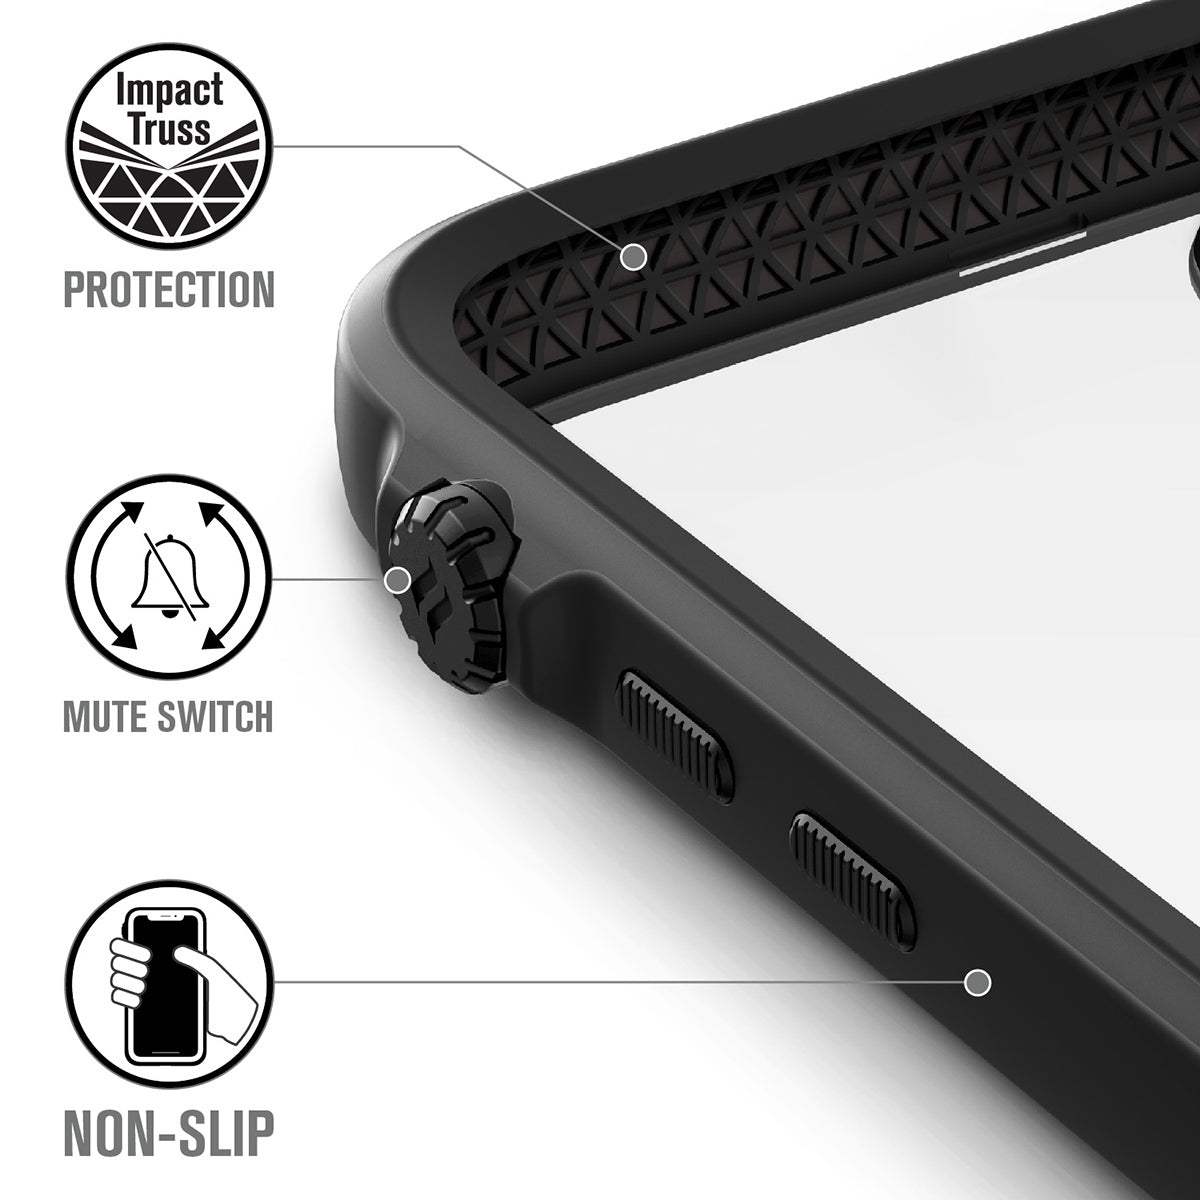 catalyst iPhone 11 series impact protection case black showing the impact truss mute switch and buttons text reads impact truss protection mute switch non-slip